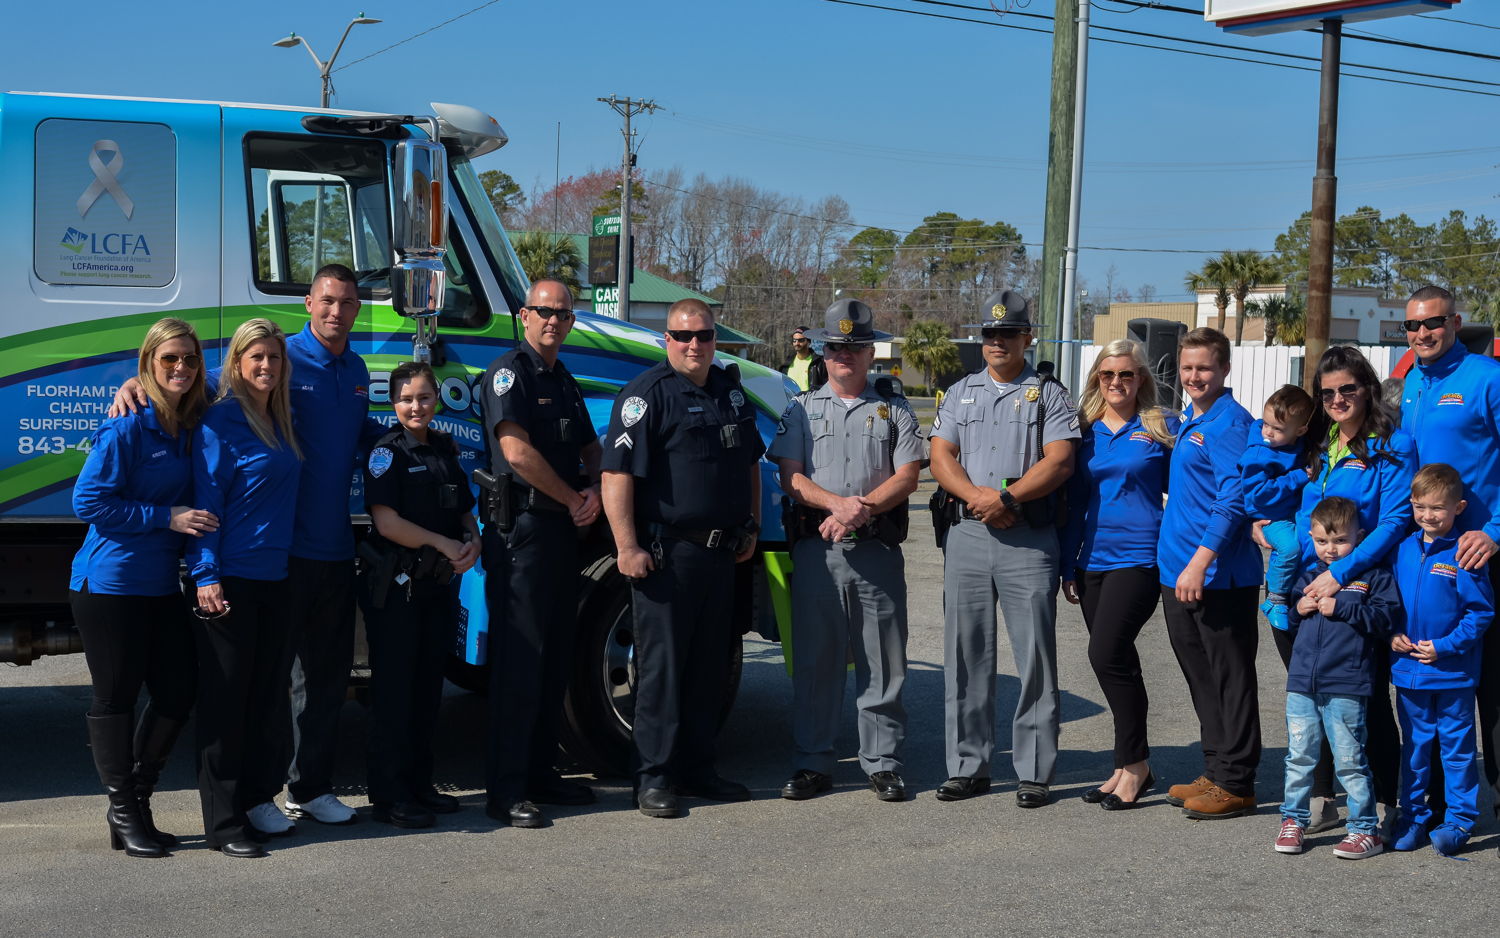 Member of the South Carolina Highway Patrol and Surfside Beach Police Department attended the event as well